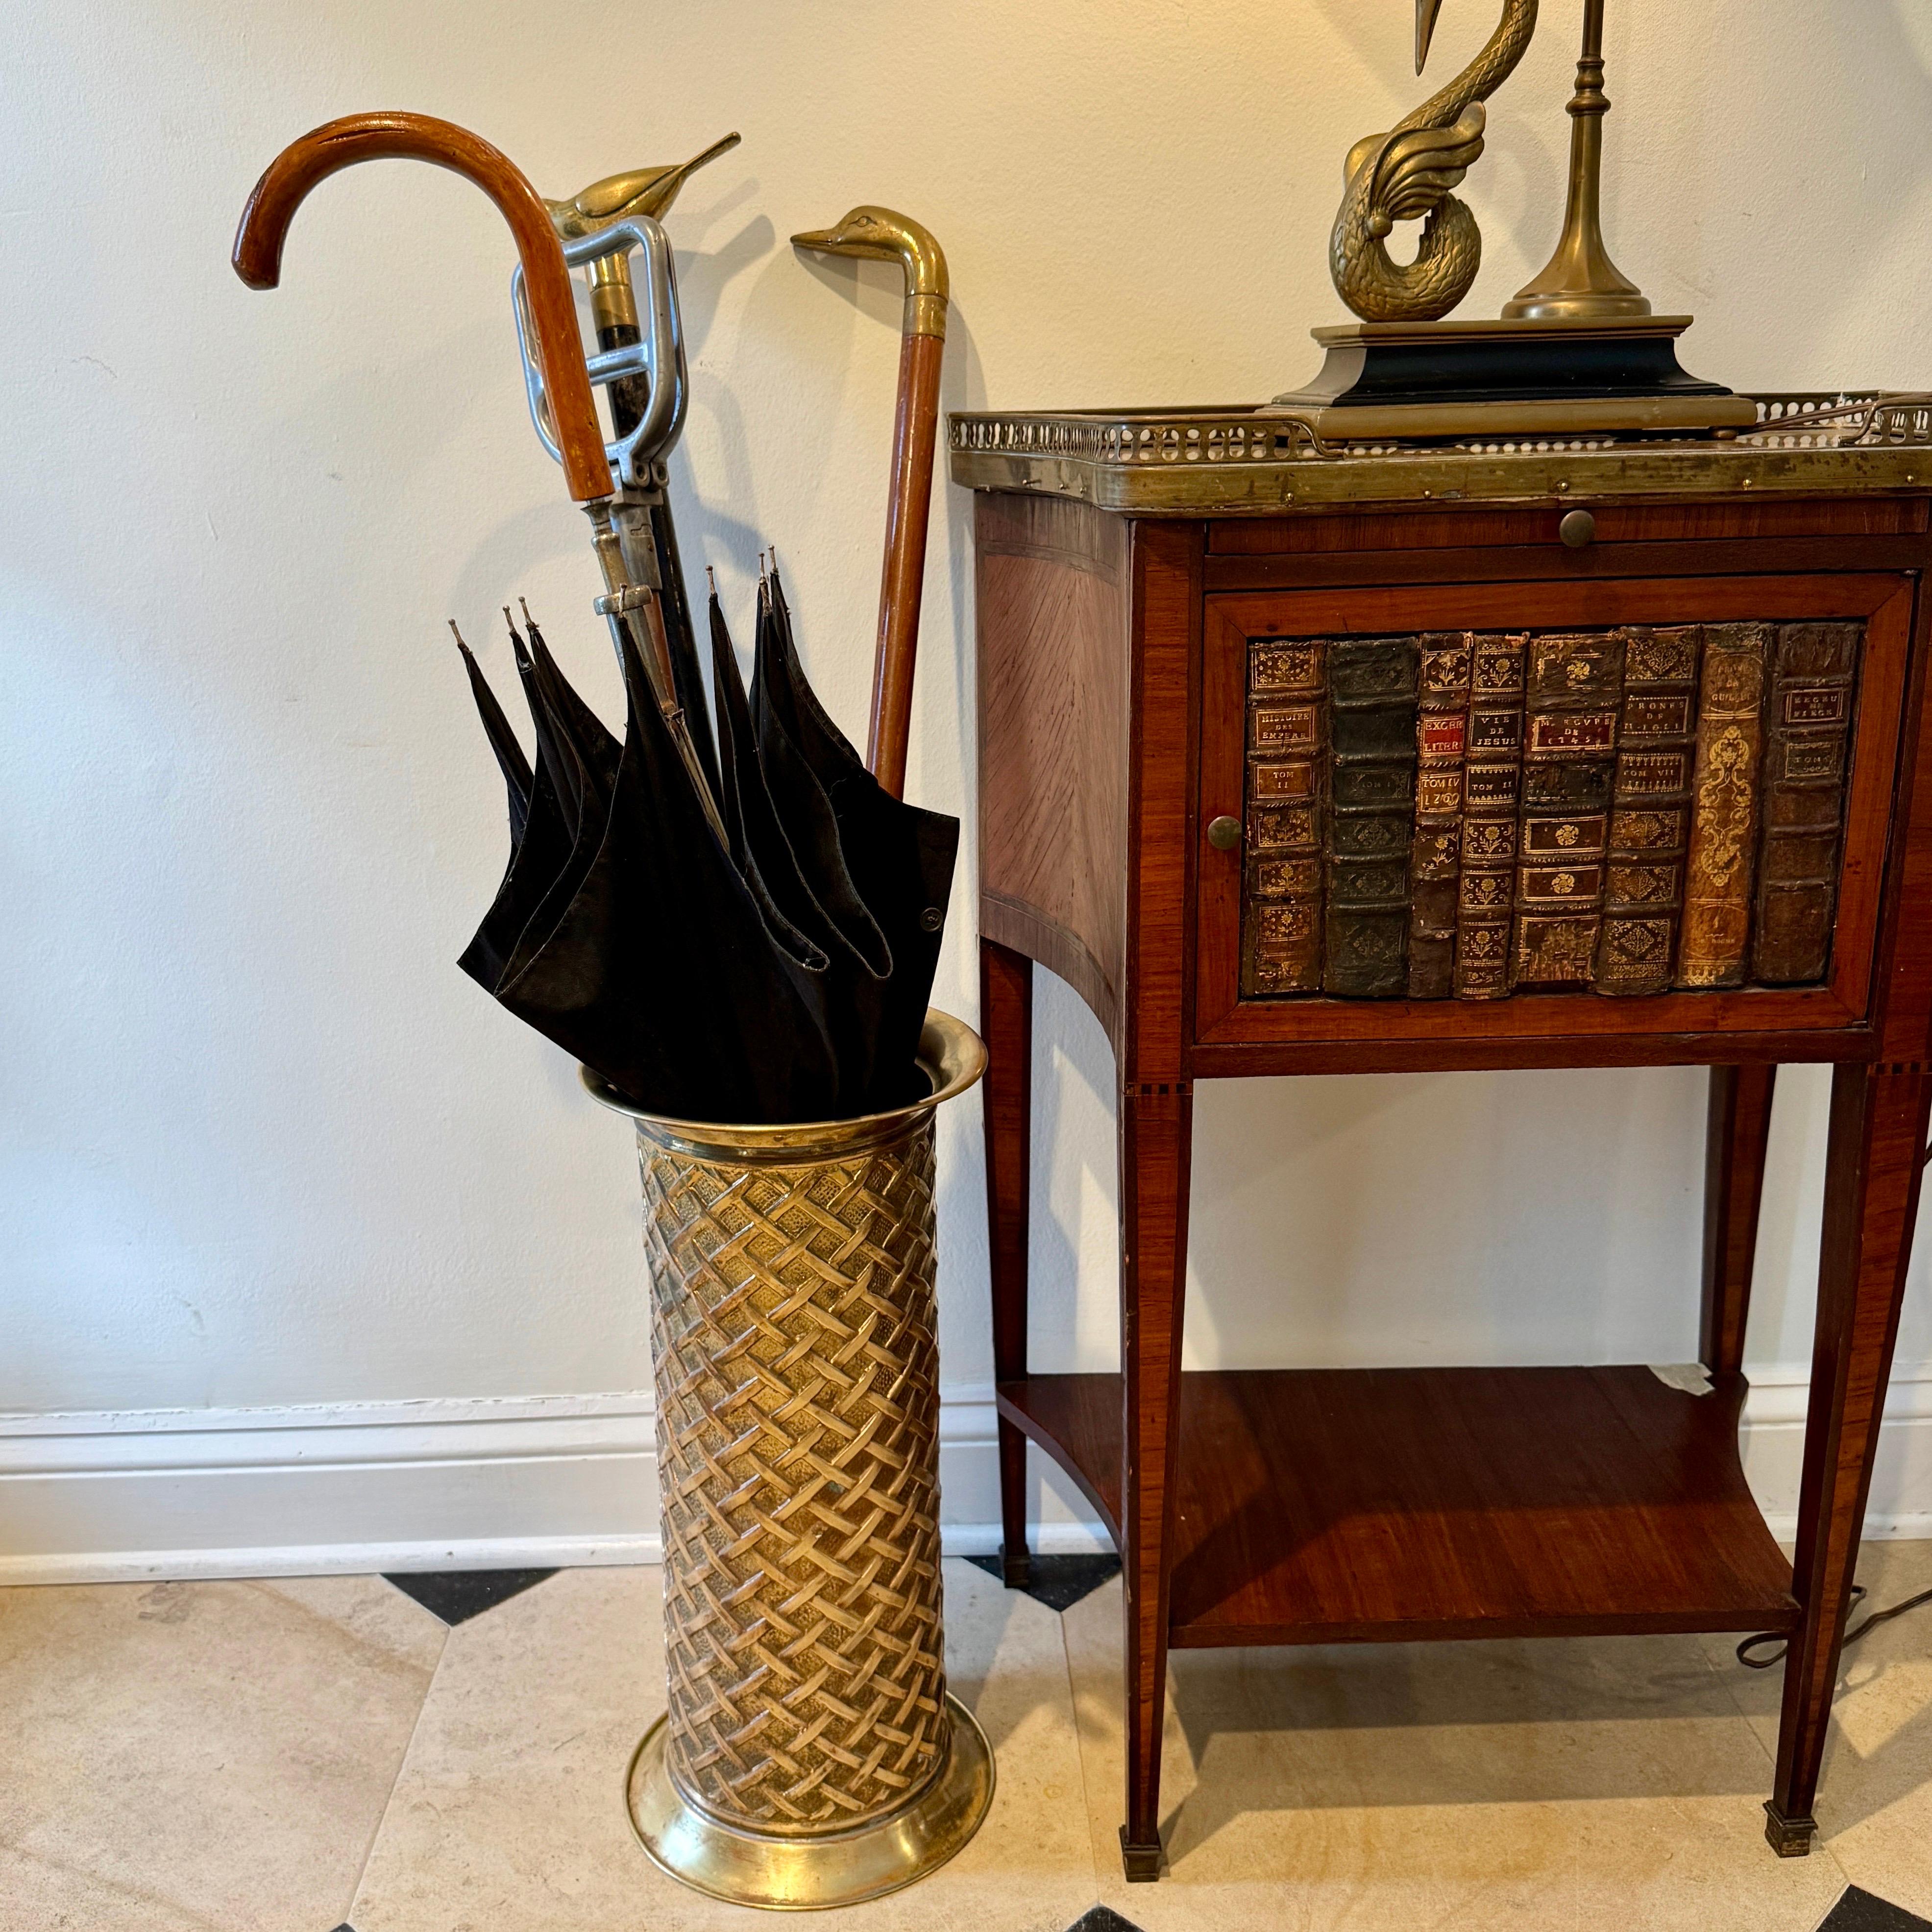 1950's Brass Metal Umbrella and Canes Stand by Lombard England Brass

The finishing touch for your well-appointed home, this vintage umbrella stand makes an essential addition to your entryway. Beautiful pressed brass stand with a basketweave, criss